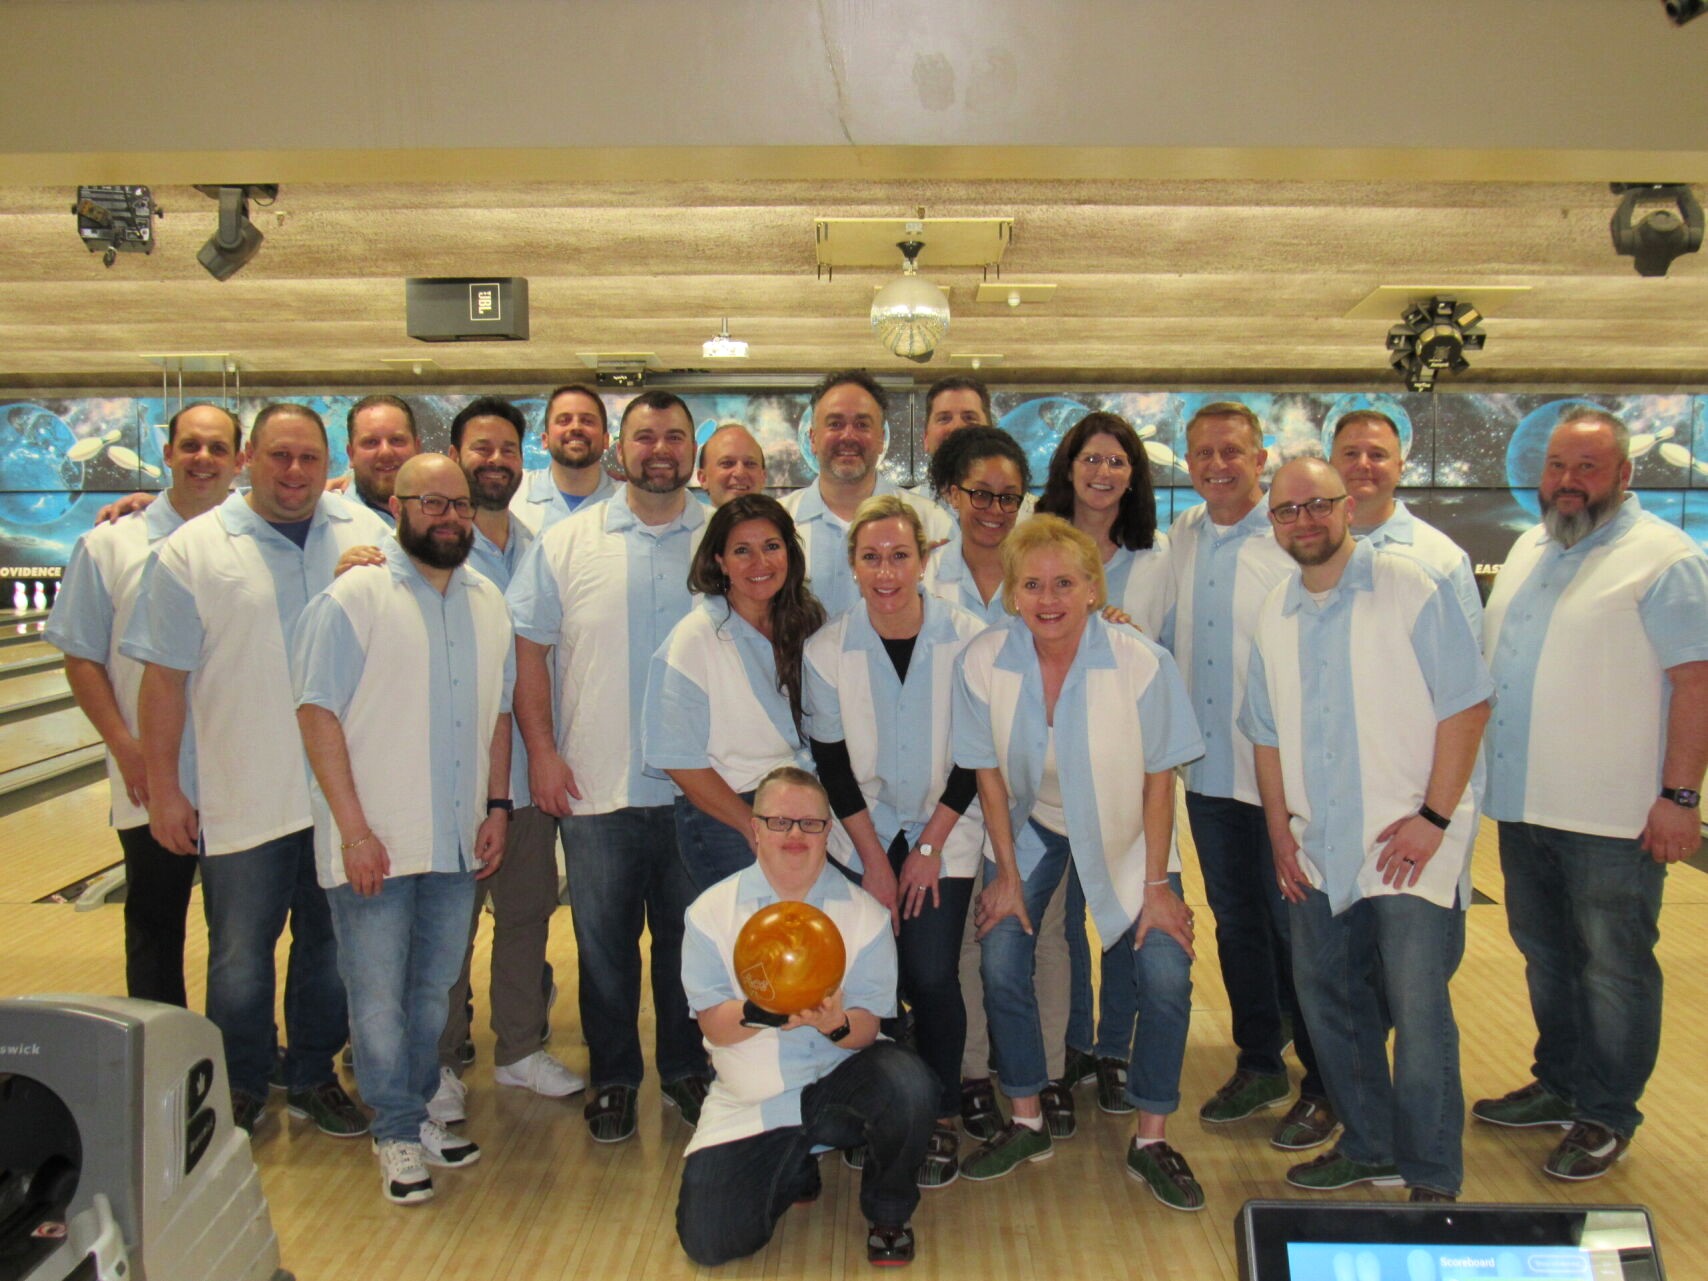 attendees at bowling community event posing for picture